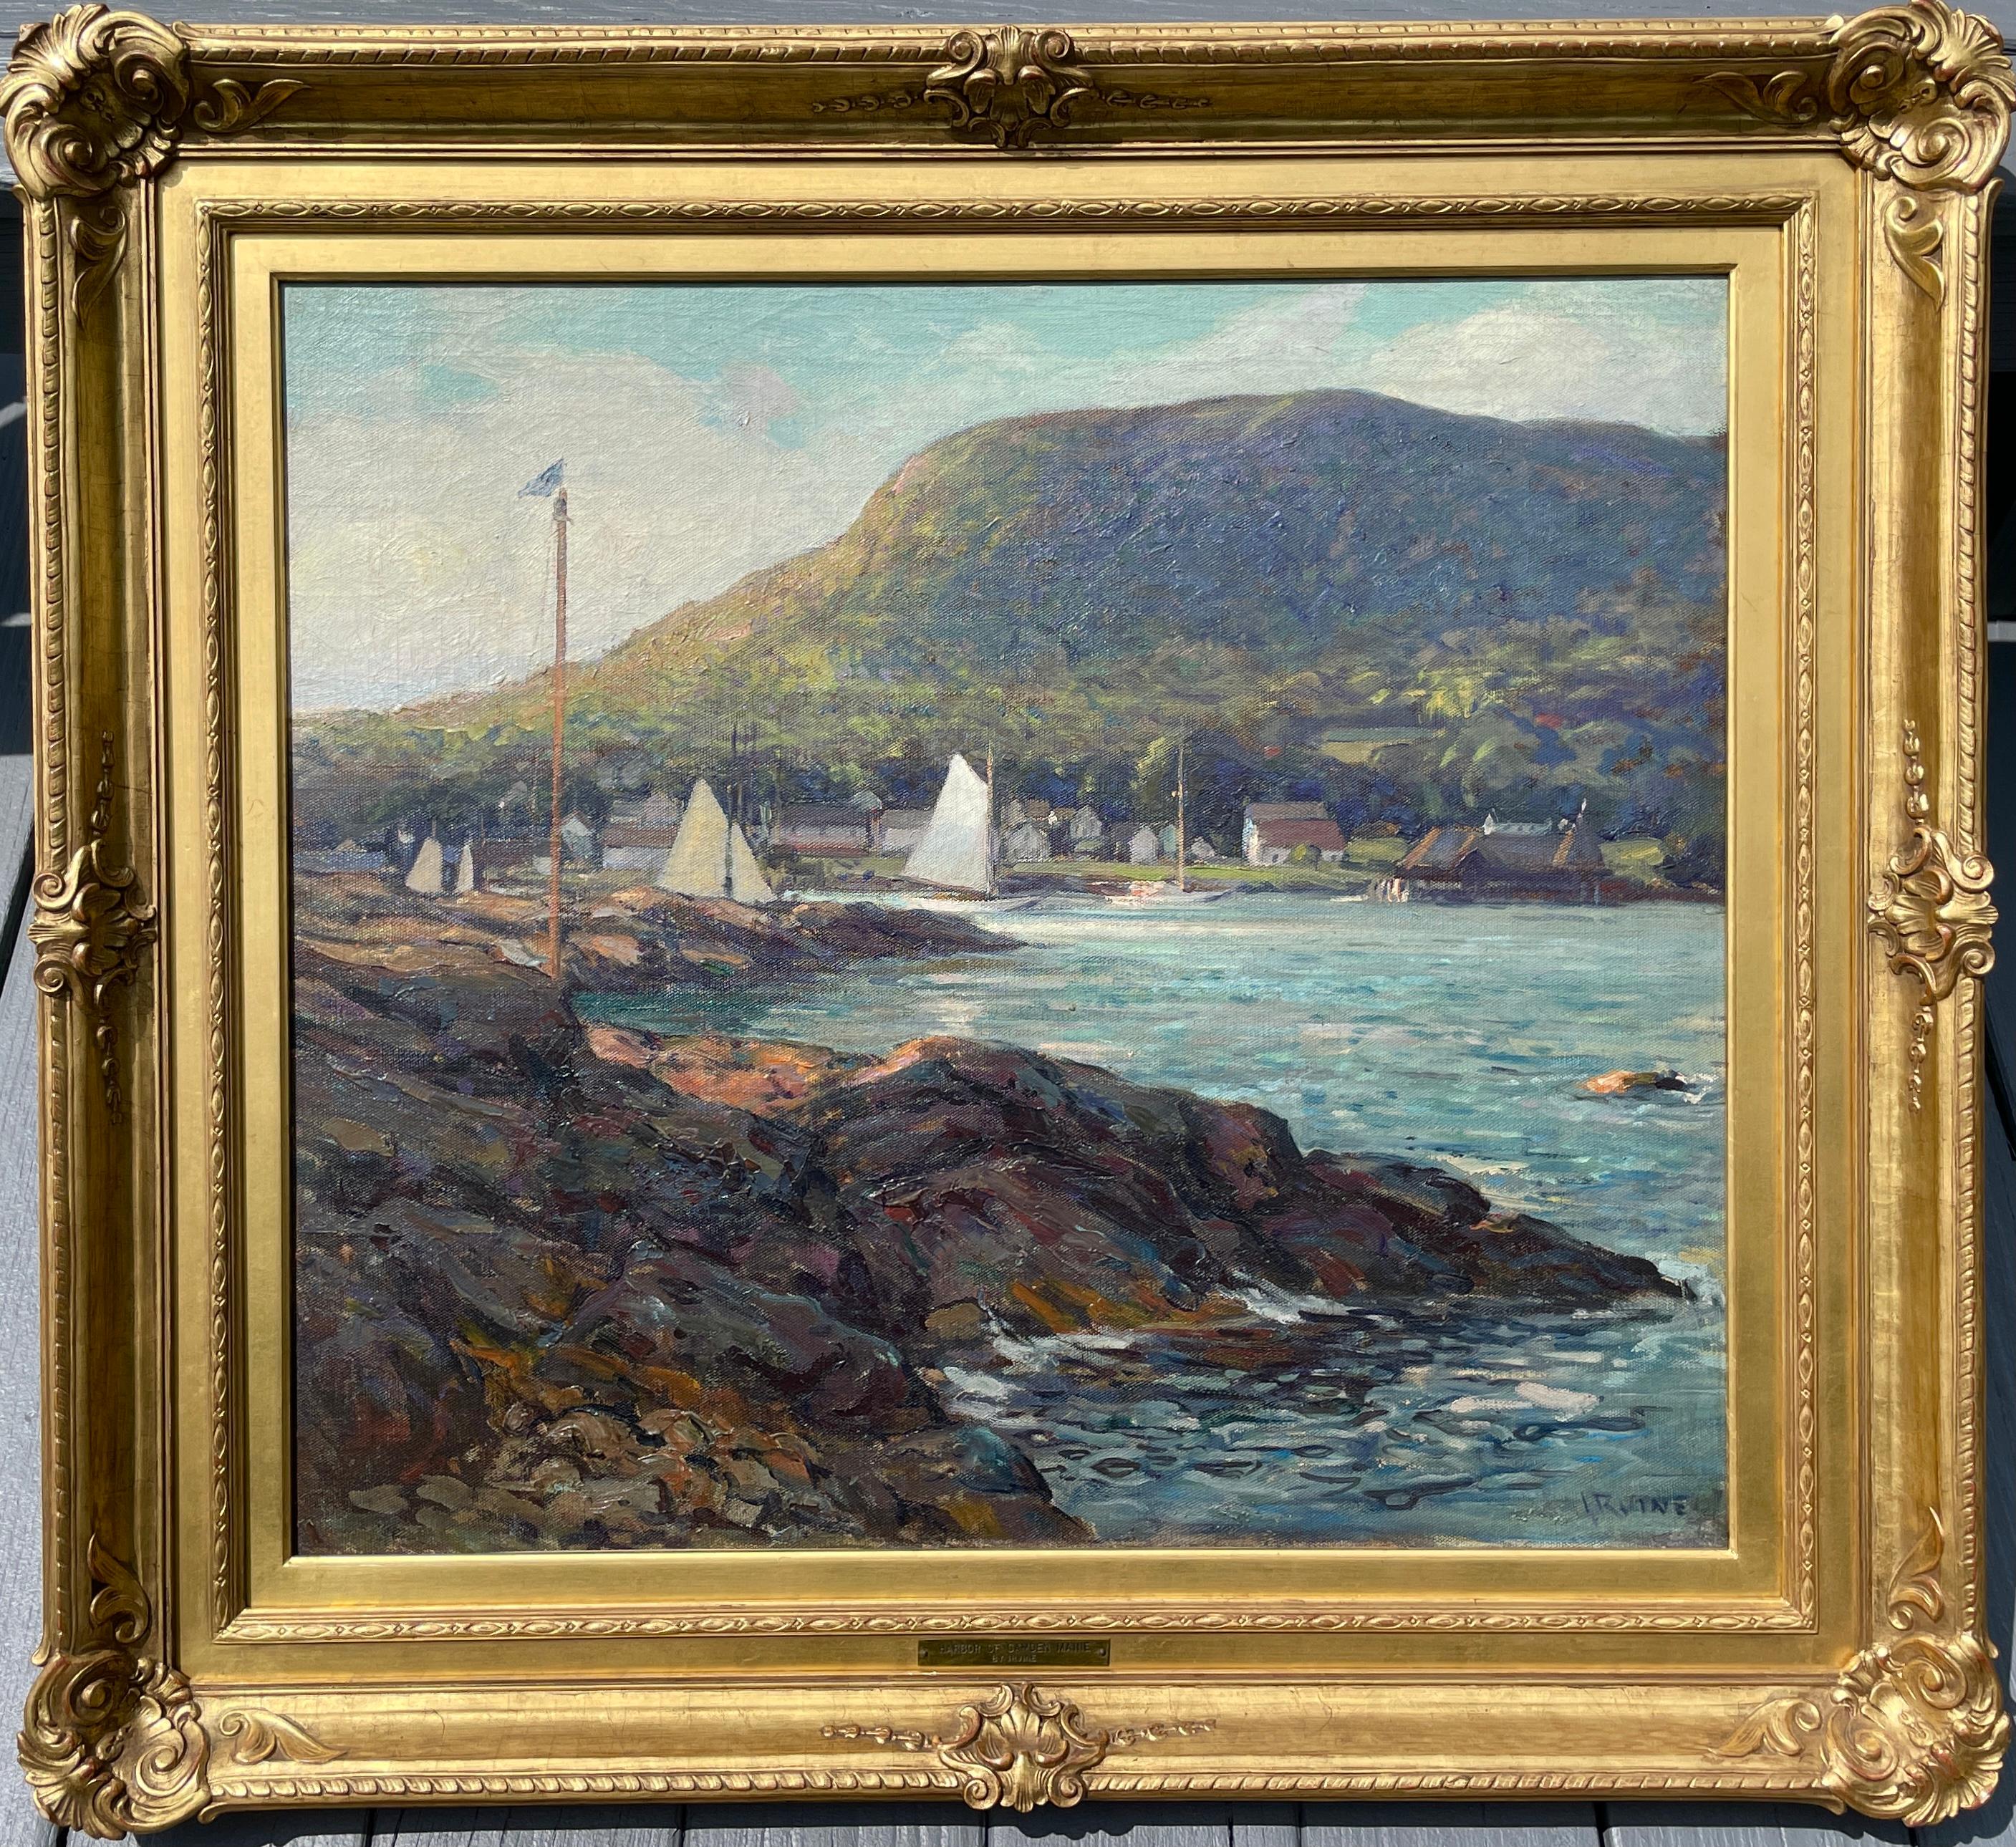 The Harbor at Camden, Maine (c.1907)
Oil on canvas
24" x 27"
32 ½" x 35 ½" x 3 ½" framed
Signed "Irvine" lower right.

Provenance: Private collection, Beverly Hills California until 1944
Private collection, Glendale, California 1944-1987
By